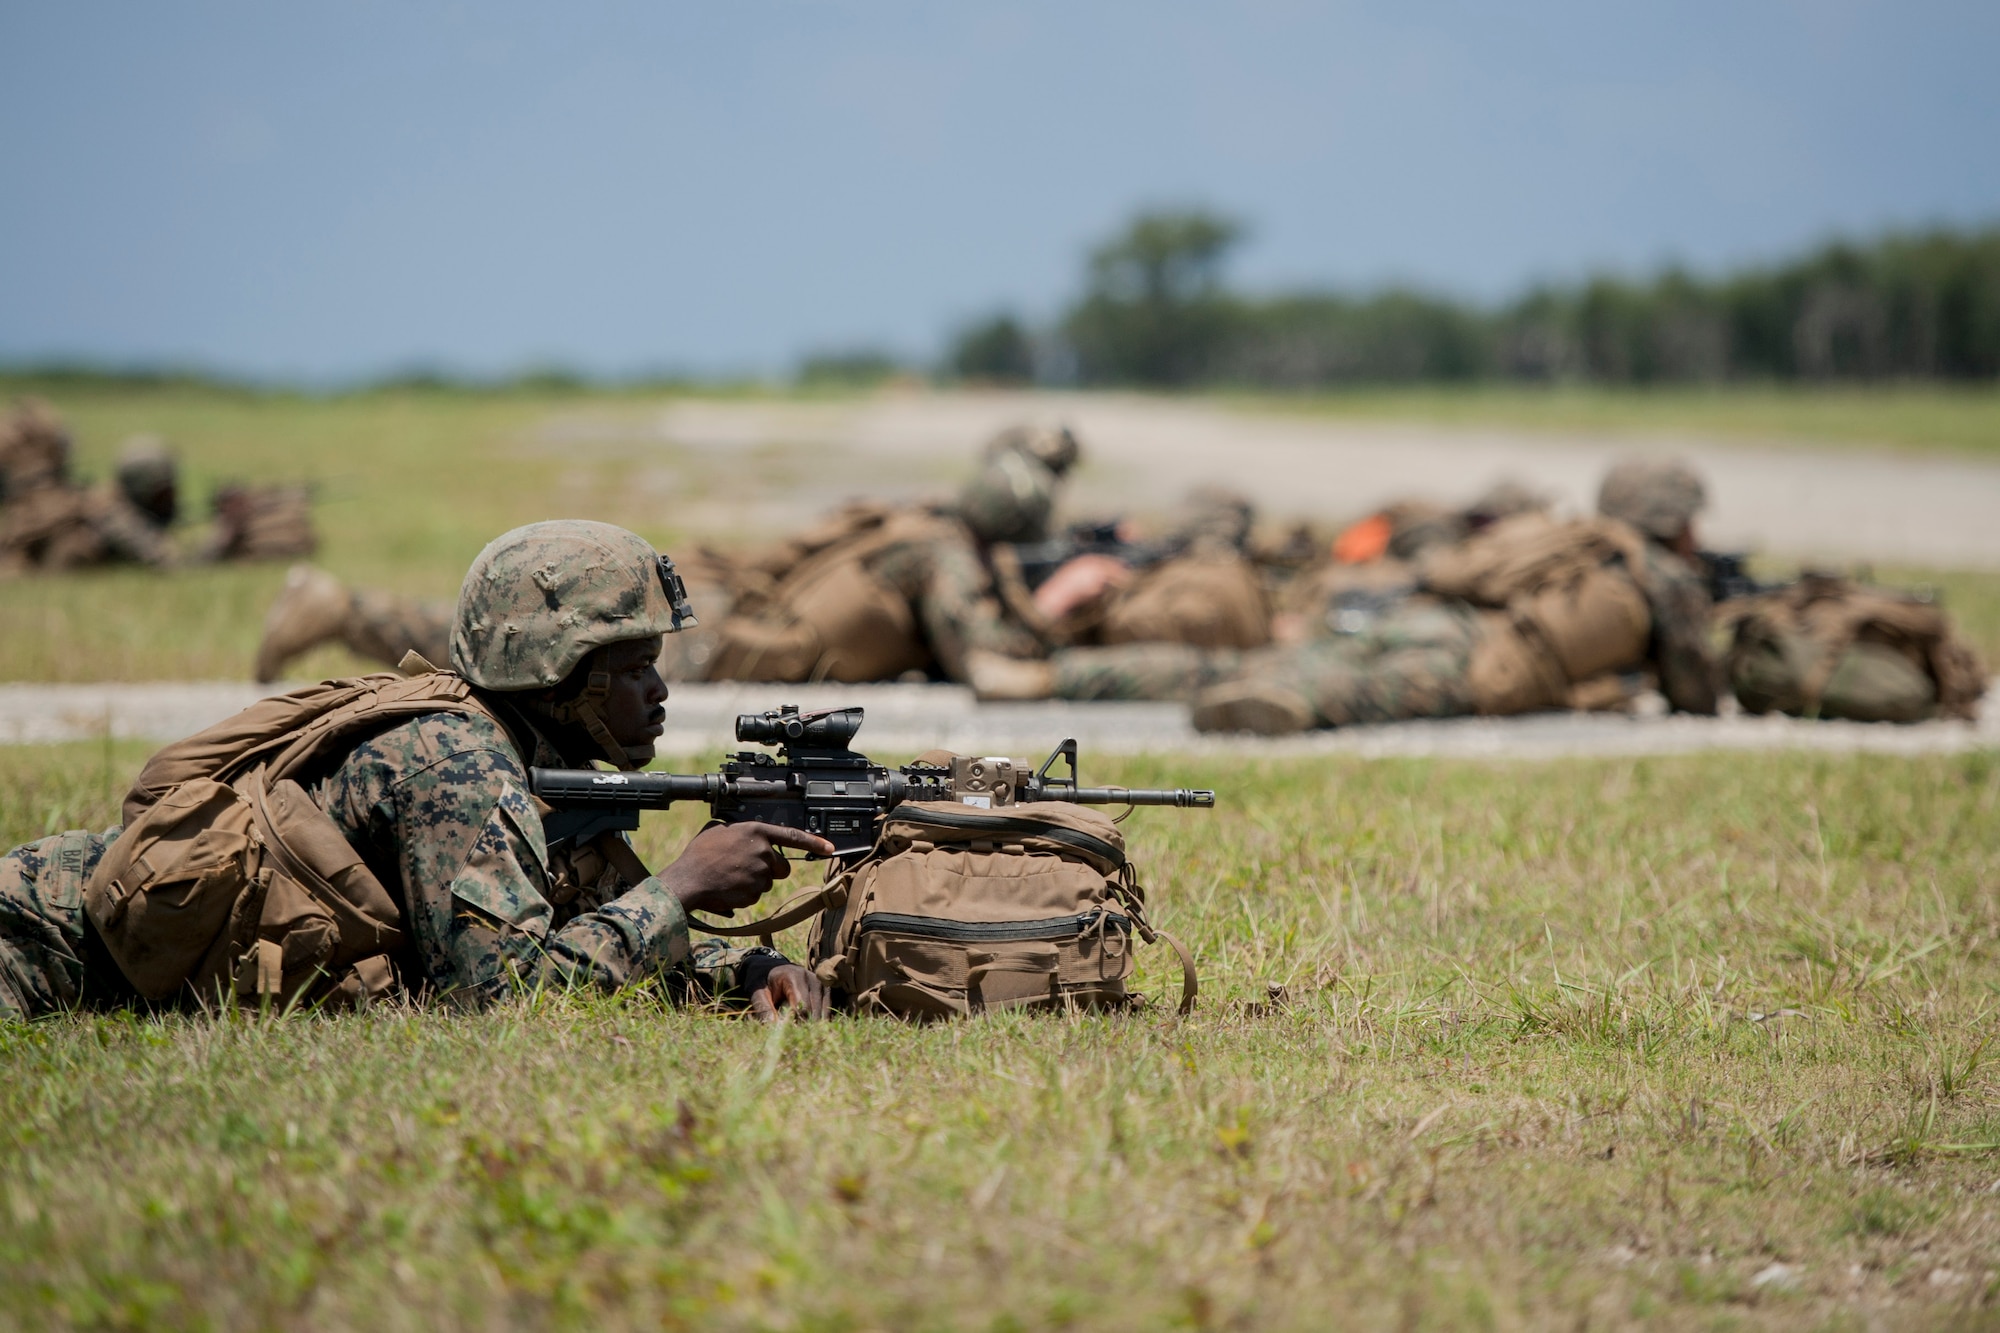 U.S. Marine Corps riflemen assigned to Golf Company, 2nd Battalion, 2nd Marine Regiment, Marine Corps Base Camp Lejeune, N.C., post a defensive perimeter during an airfield seizure exercise July 20, 2016, at Iejima airfield, Japan. Golf Company conducted their first long-range airfield seizure exercise with support from the Marine Medium Tiltrotor Squadron 265, Marine Corps Air Station Futenma, Japan and the U.S. Air Force 353rd Special Operations Group, Kadena Air Base, Japan. (U.S. Air Force Photo by Senior Airman Peter Reft) 